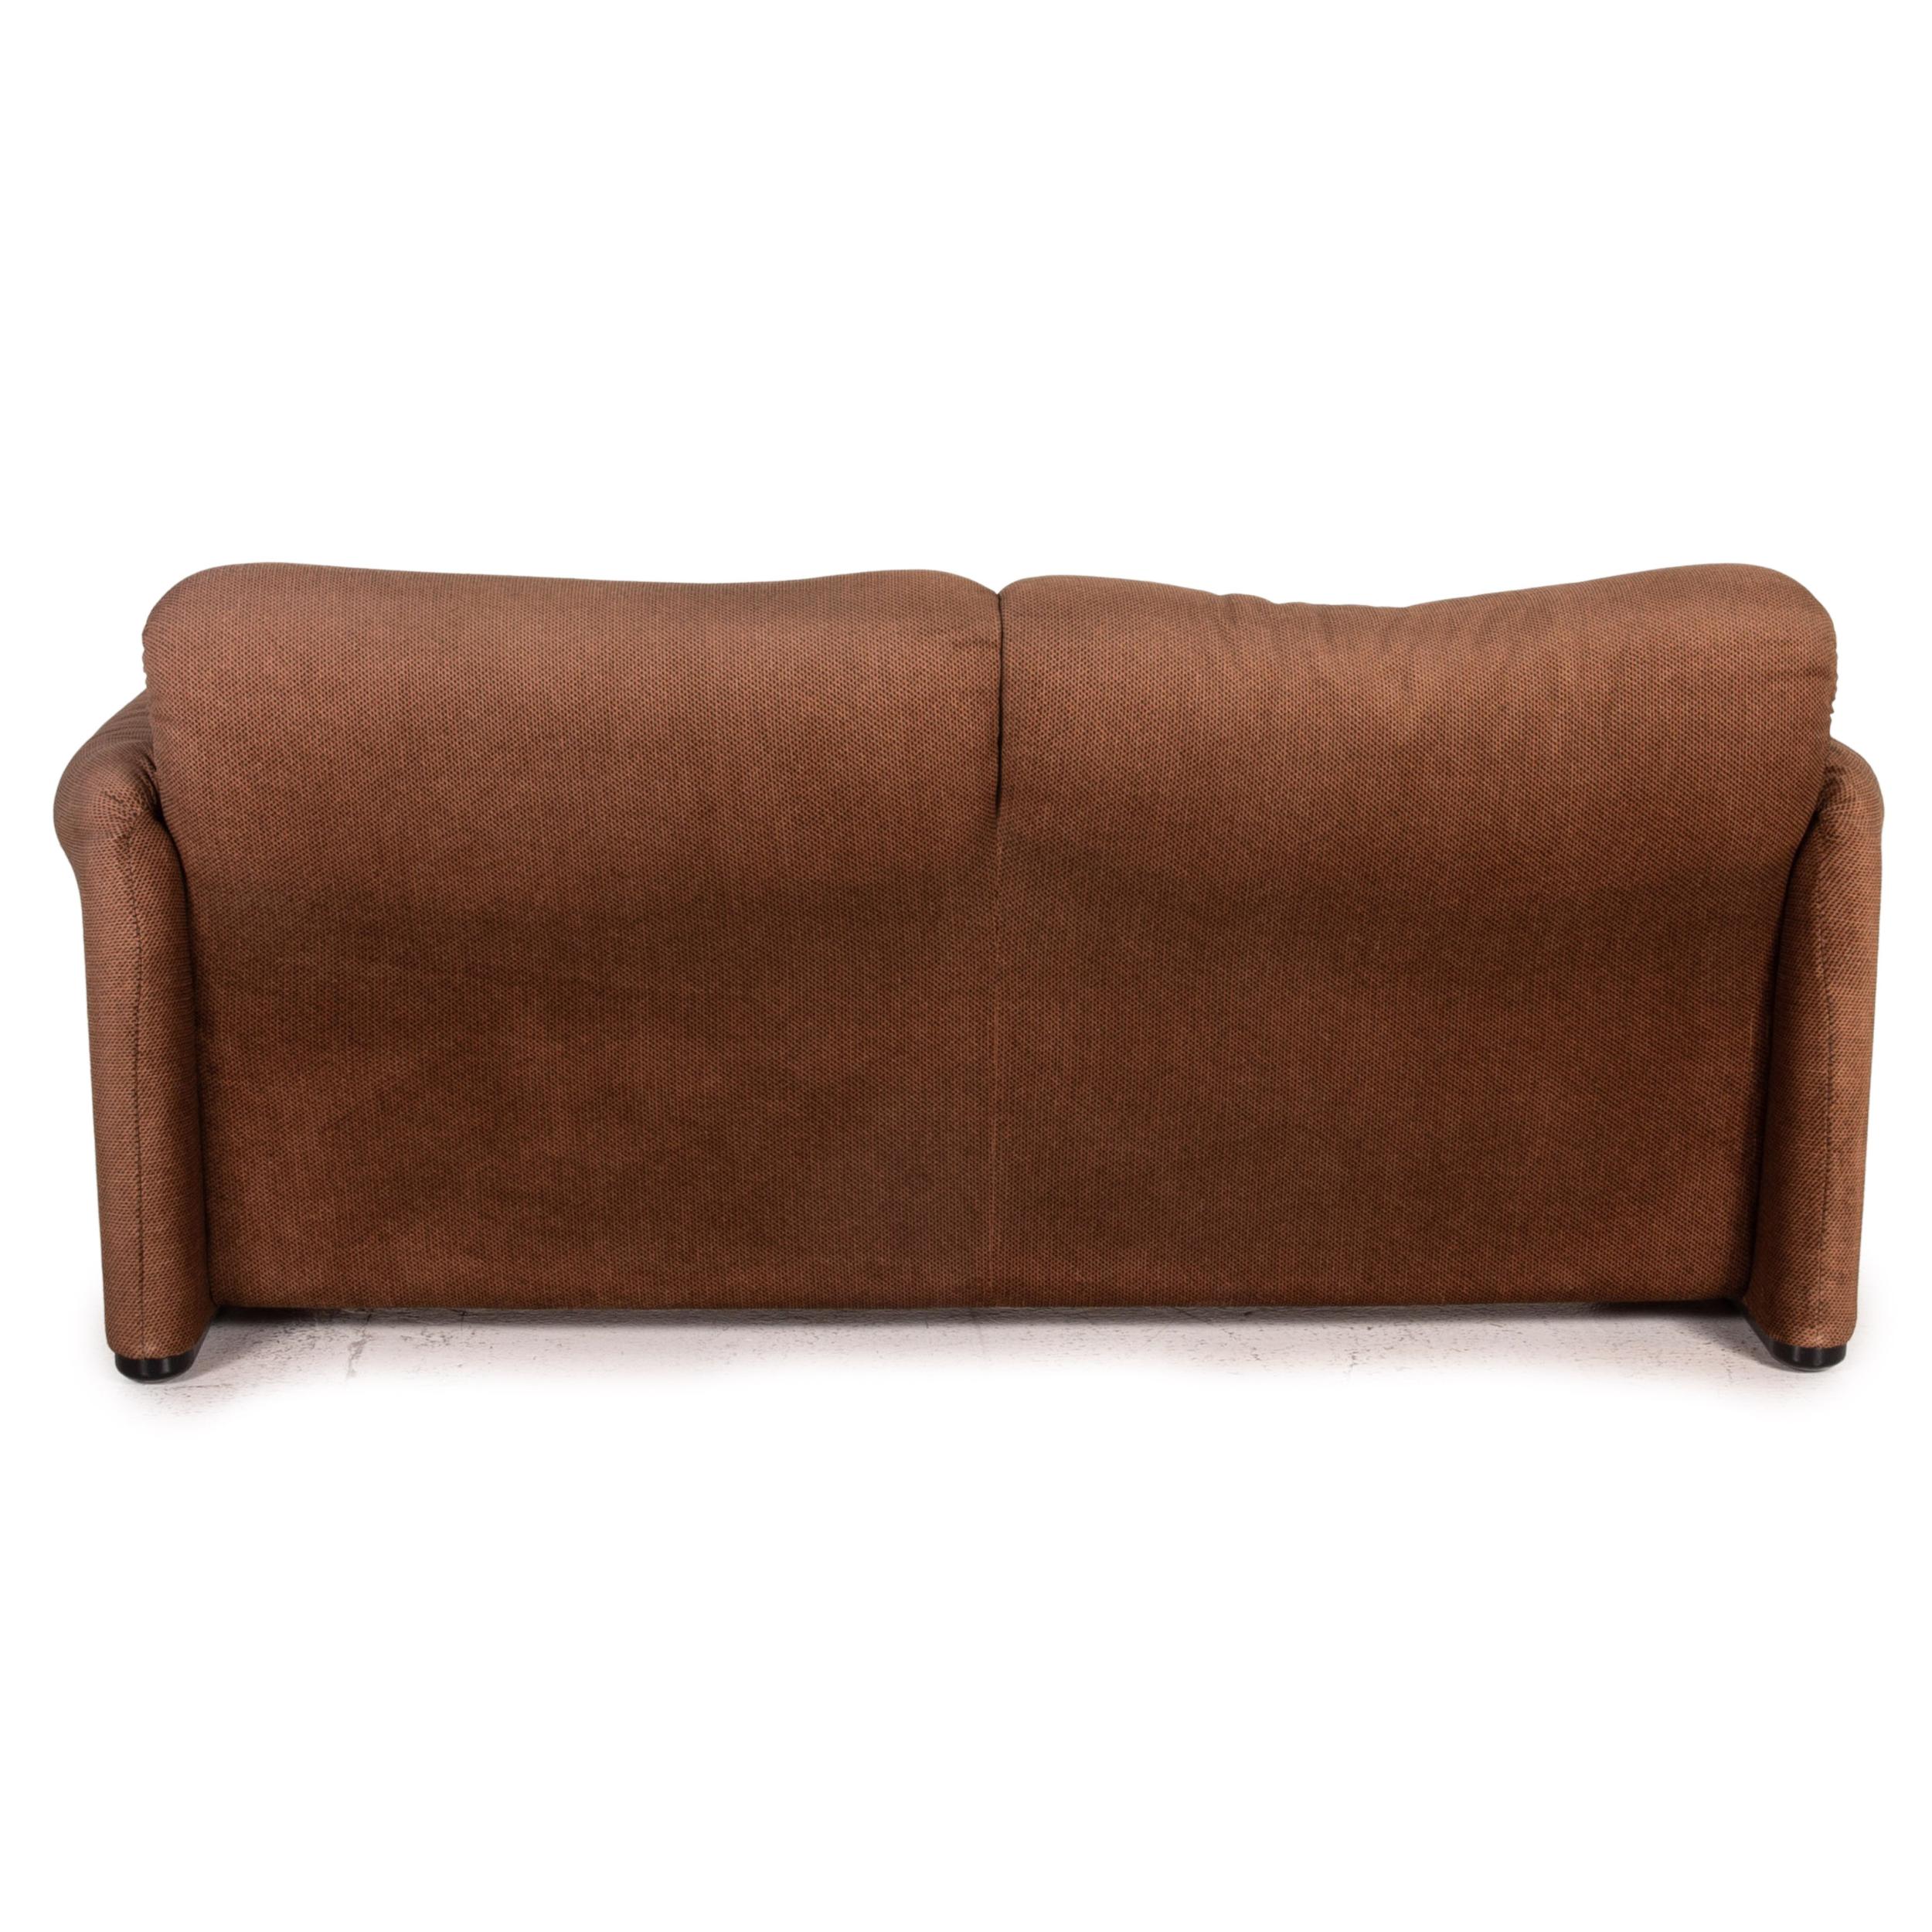 Cassina Maralunga Fabric Sofa Brown Two-Seater Function Couch 4